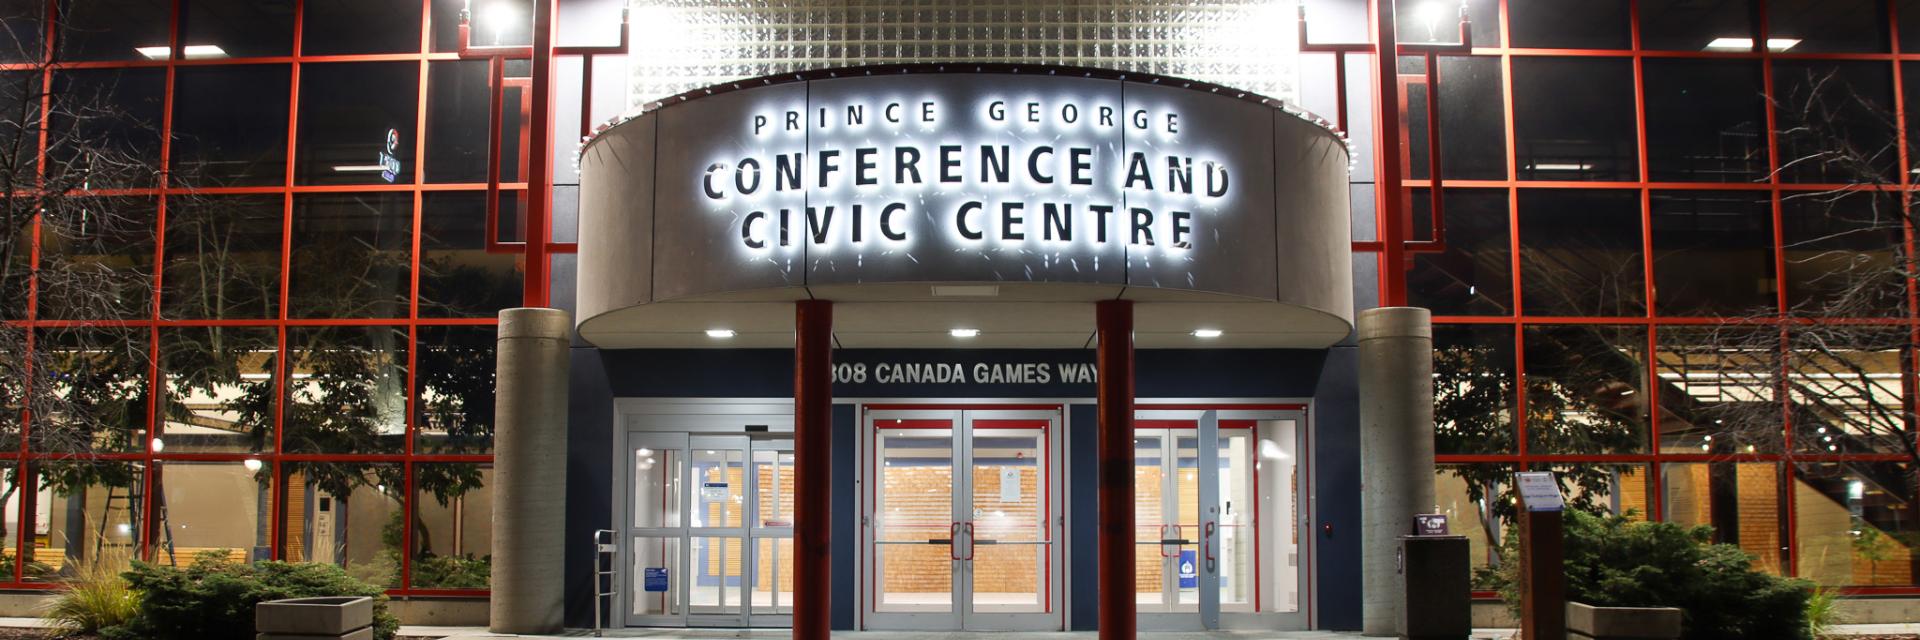 Evening photo of the front of the civic centre